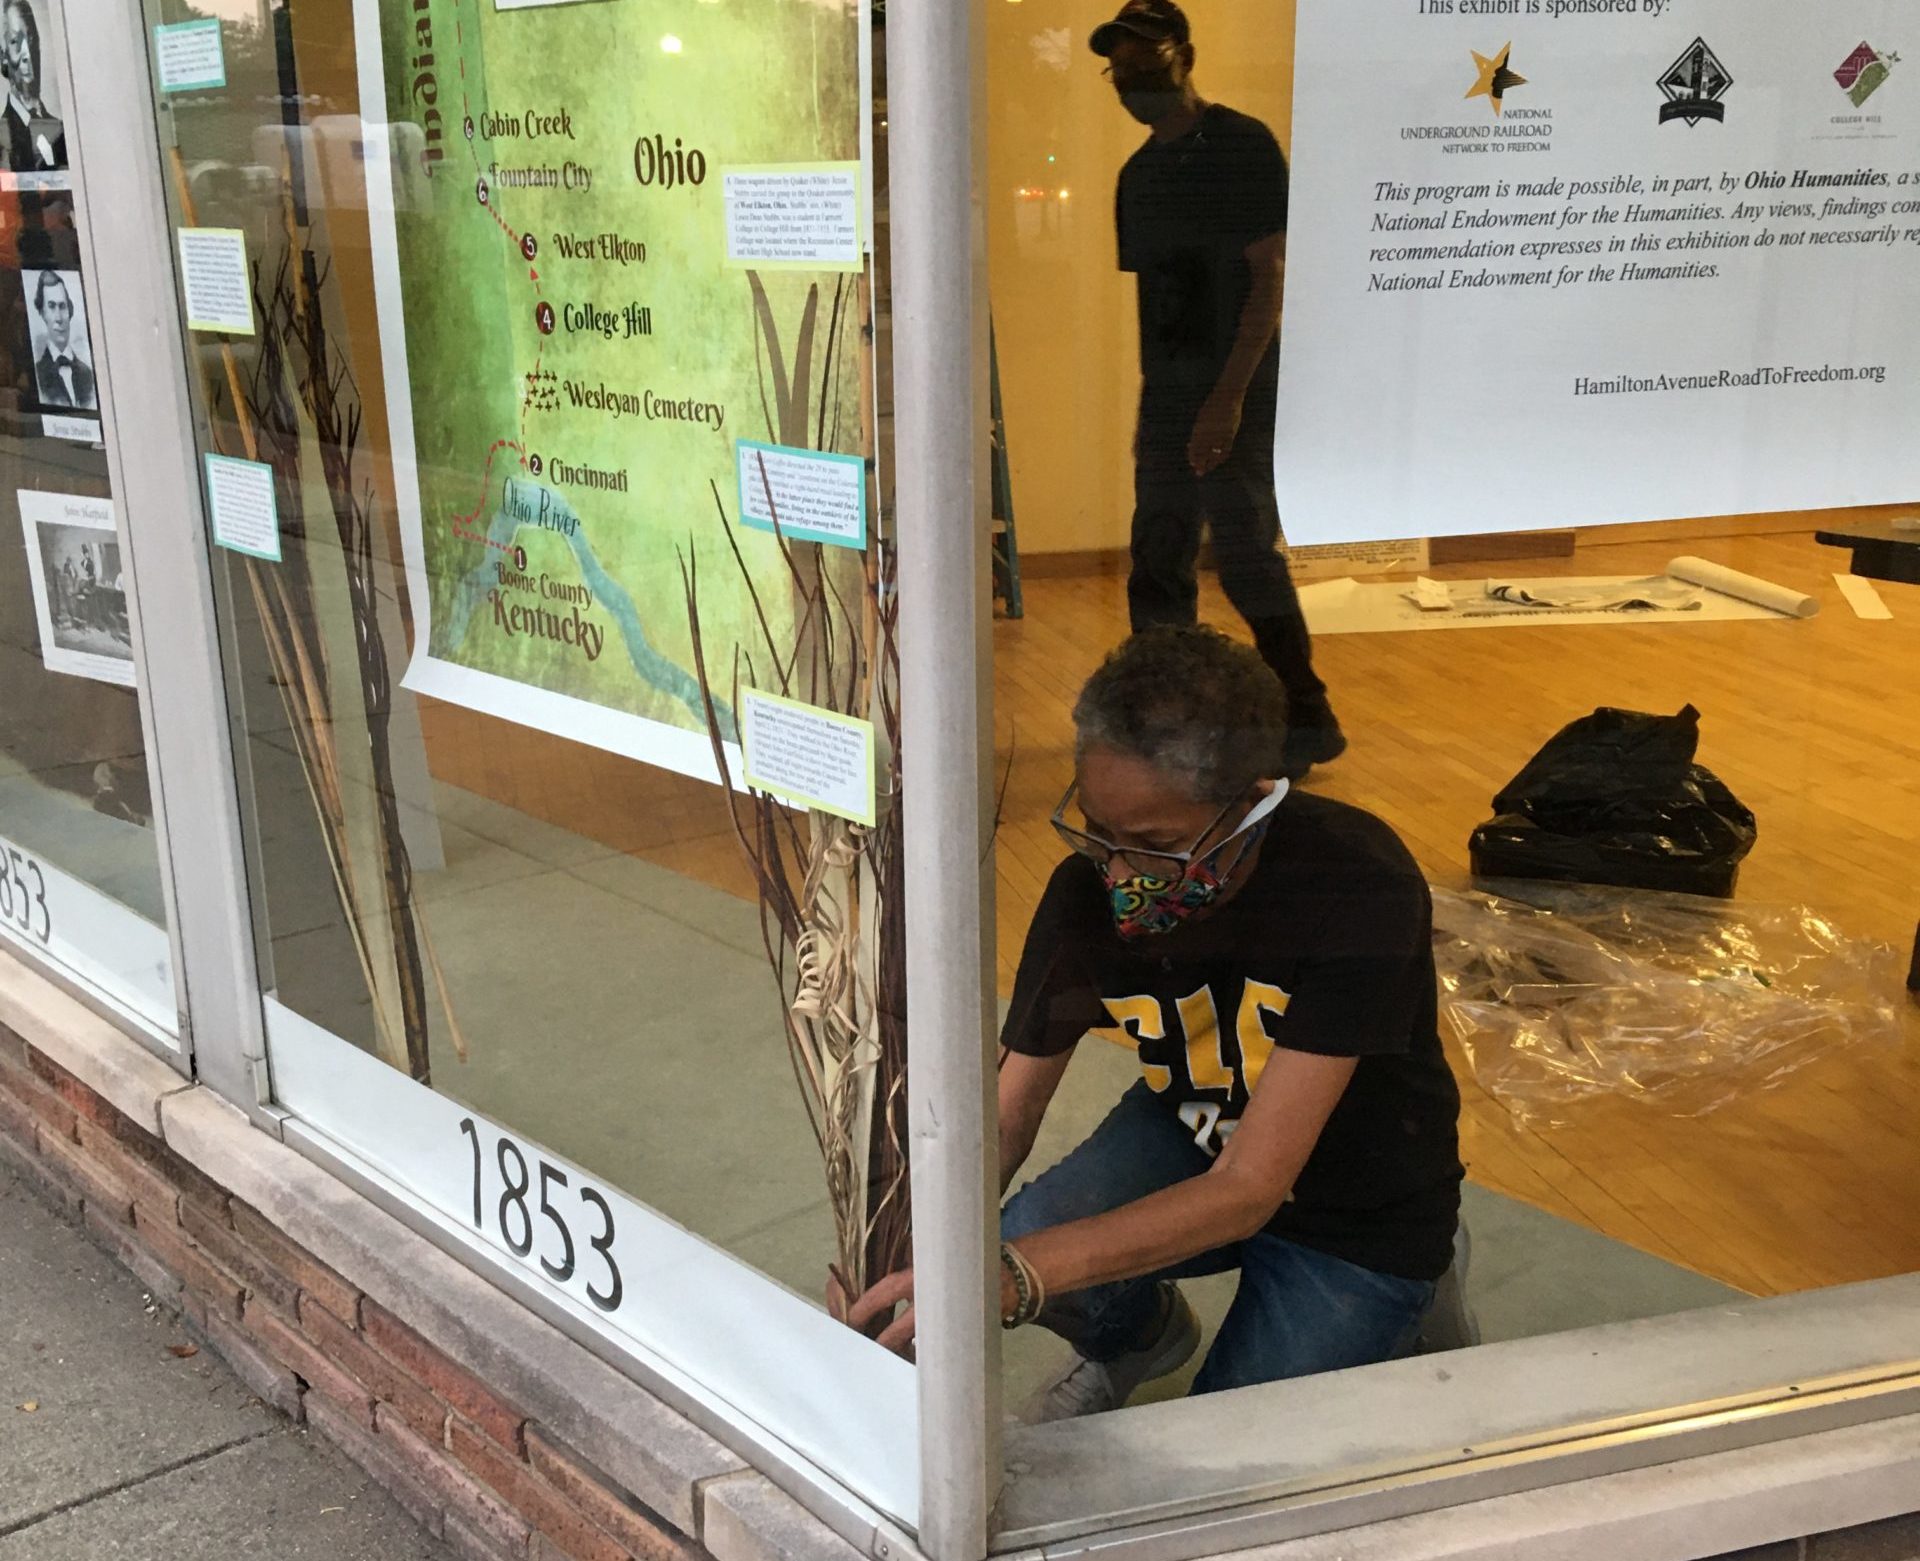 A worker installs a window exhibit at the College Hill Historical Society in Cincinnati